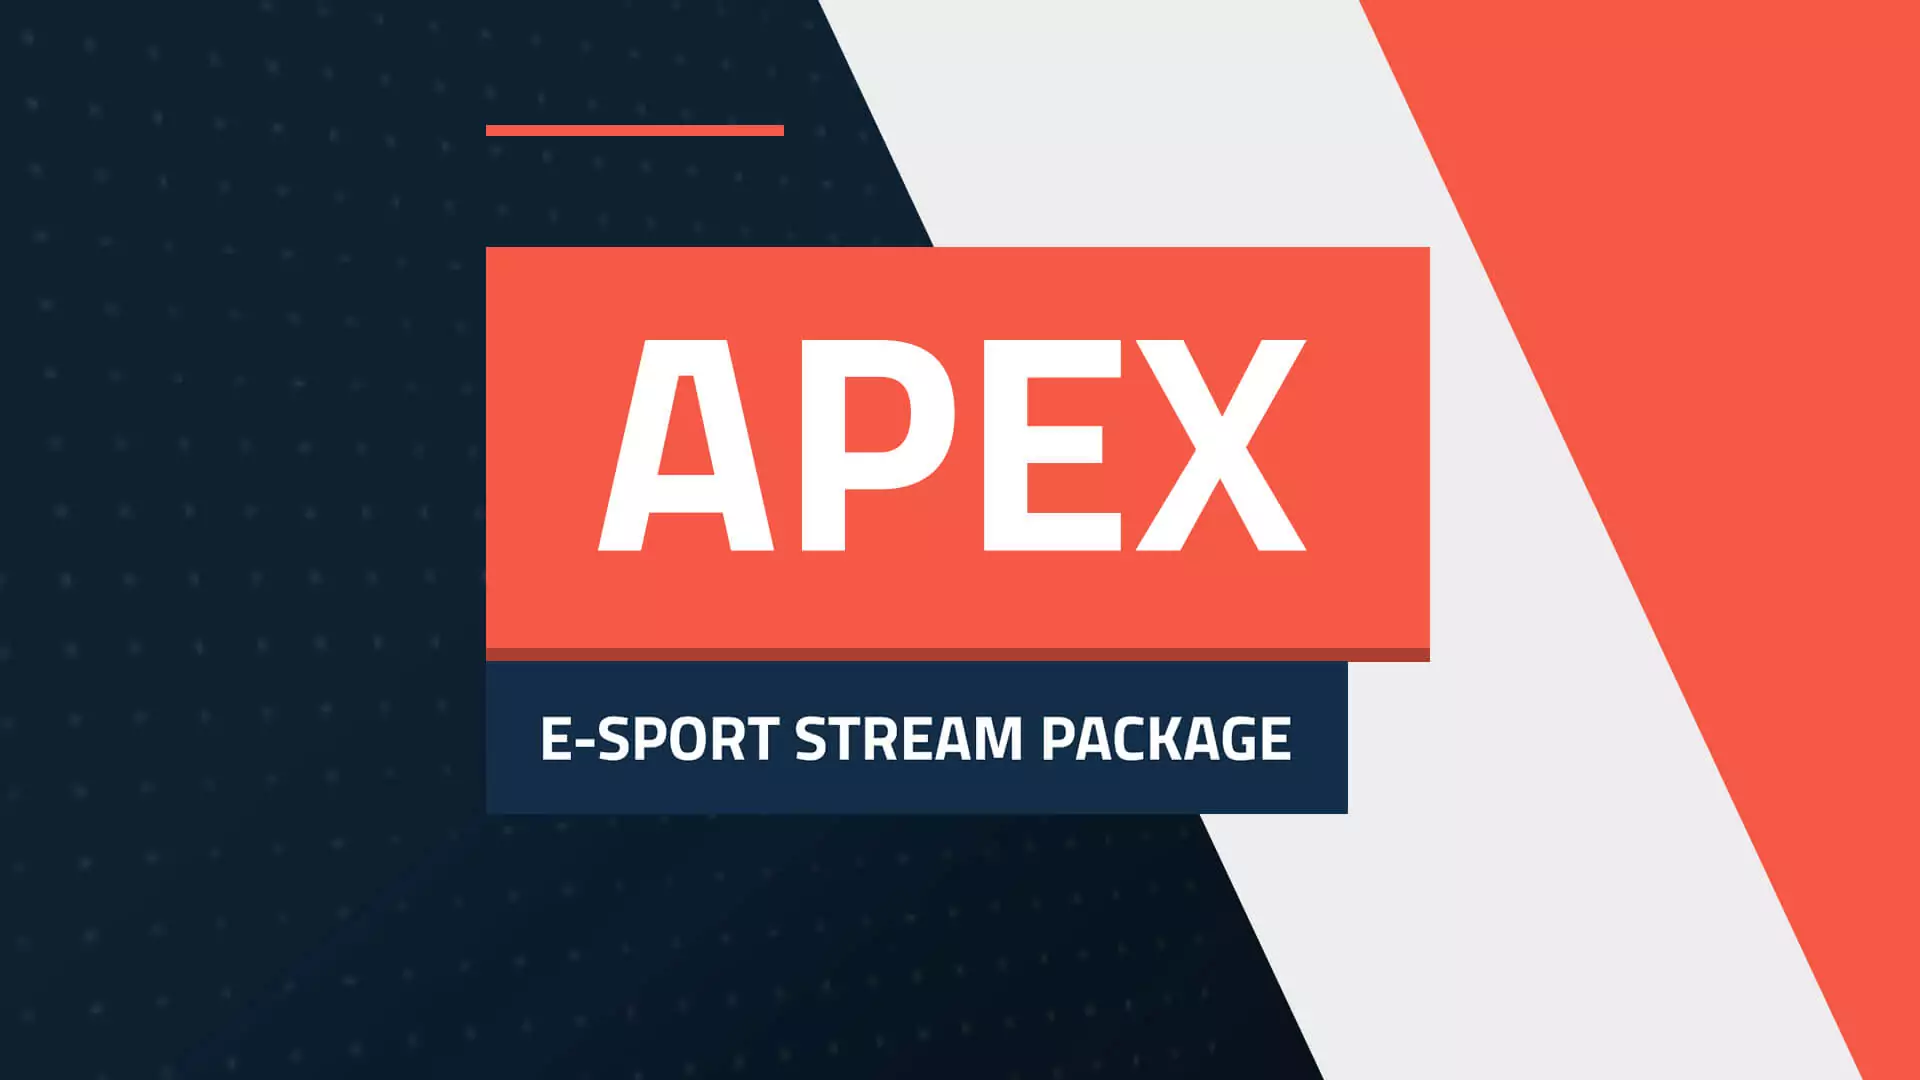 Apex E-Sport Package - Main Image